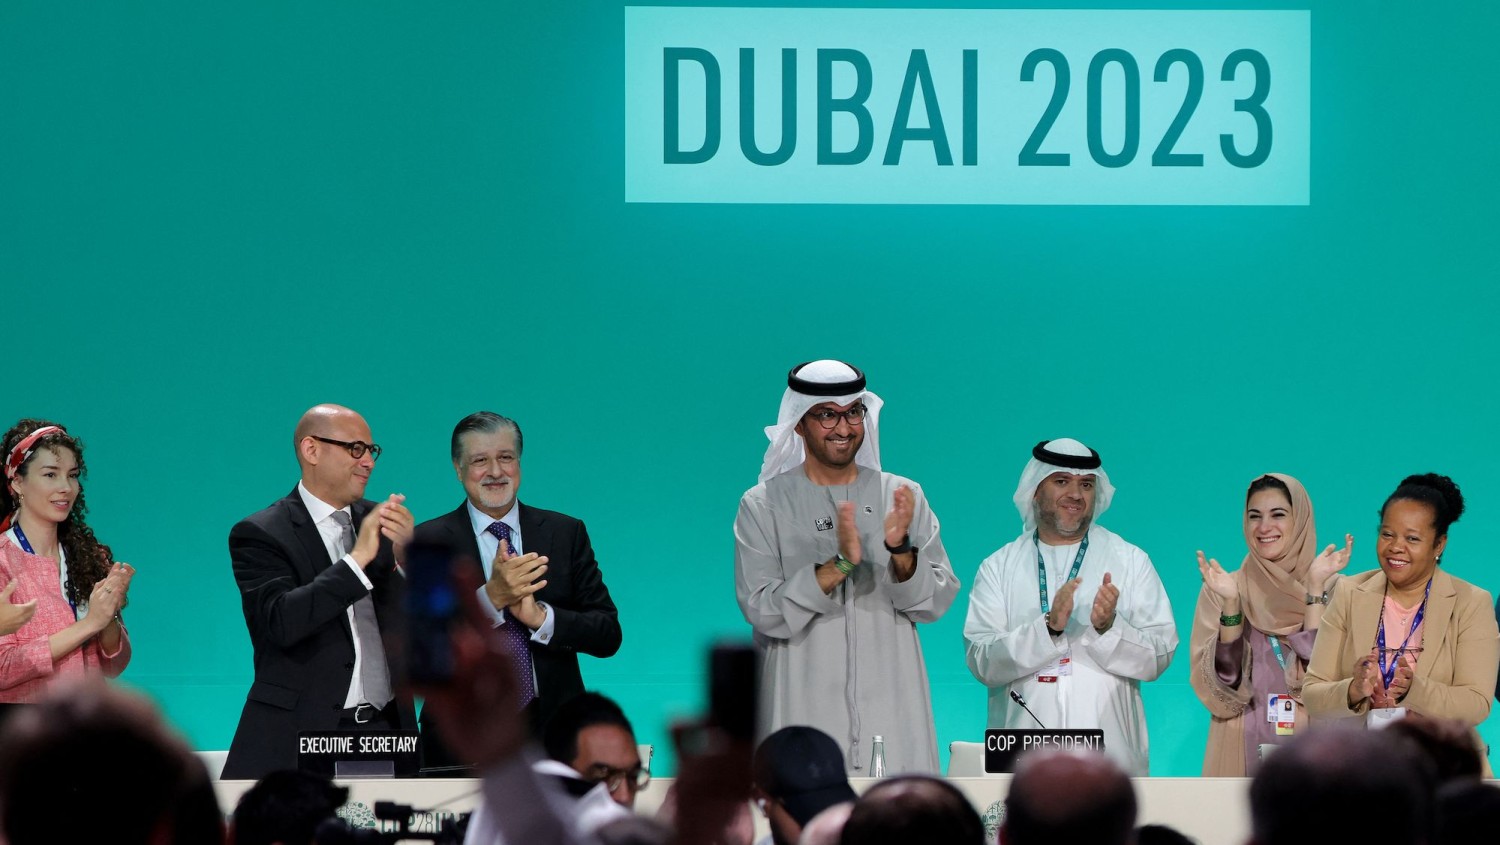 COP28 president Sultan Ahmed Al Jaber (center) applauds during a plenary sessions the United Nations climate summit in Dubai on December 13, 2023. Giuseppe Cacace/AFP/Getty Images